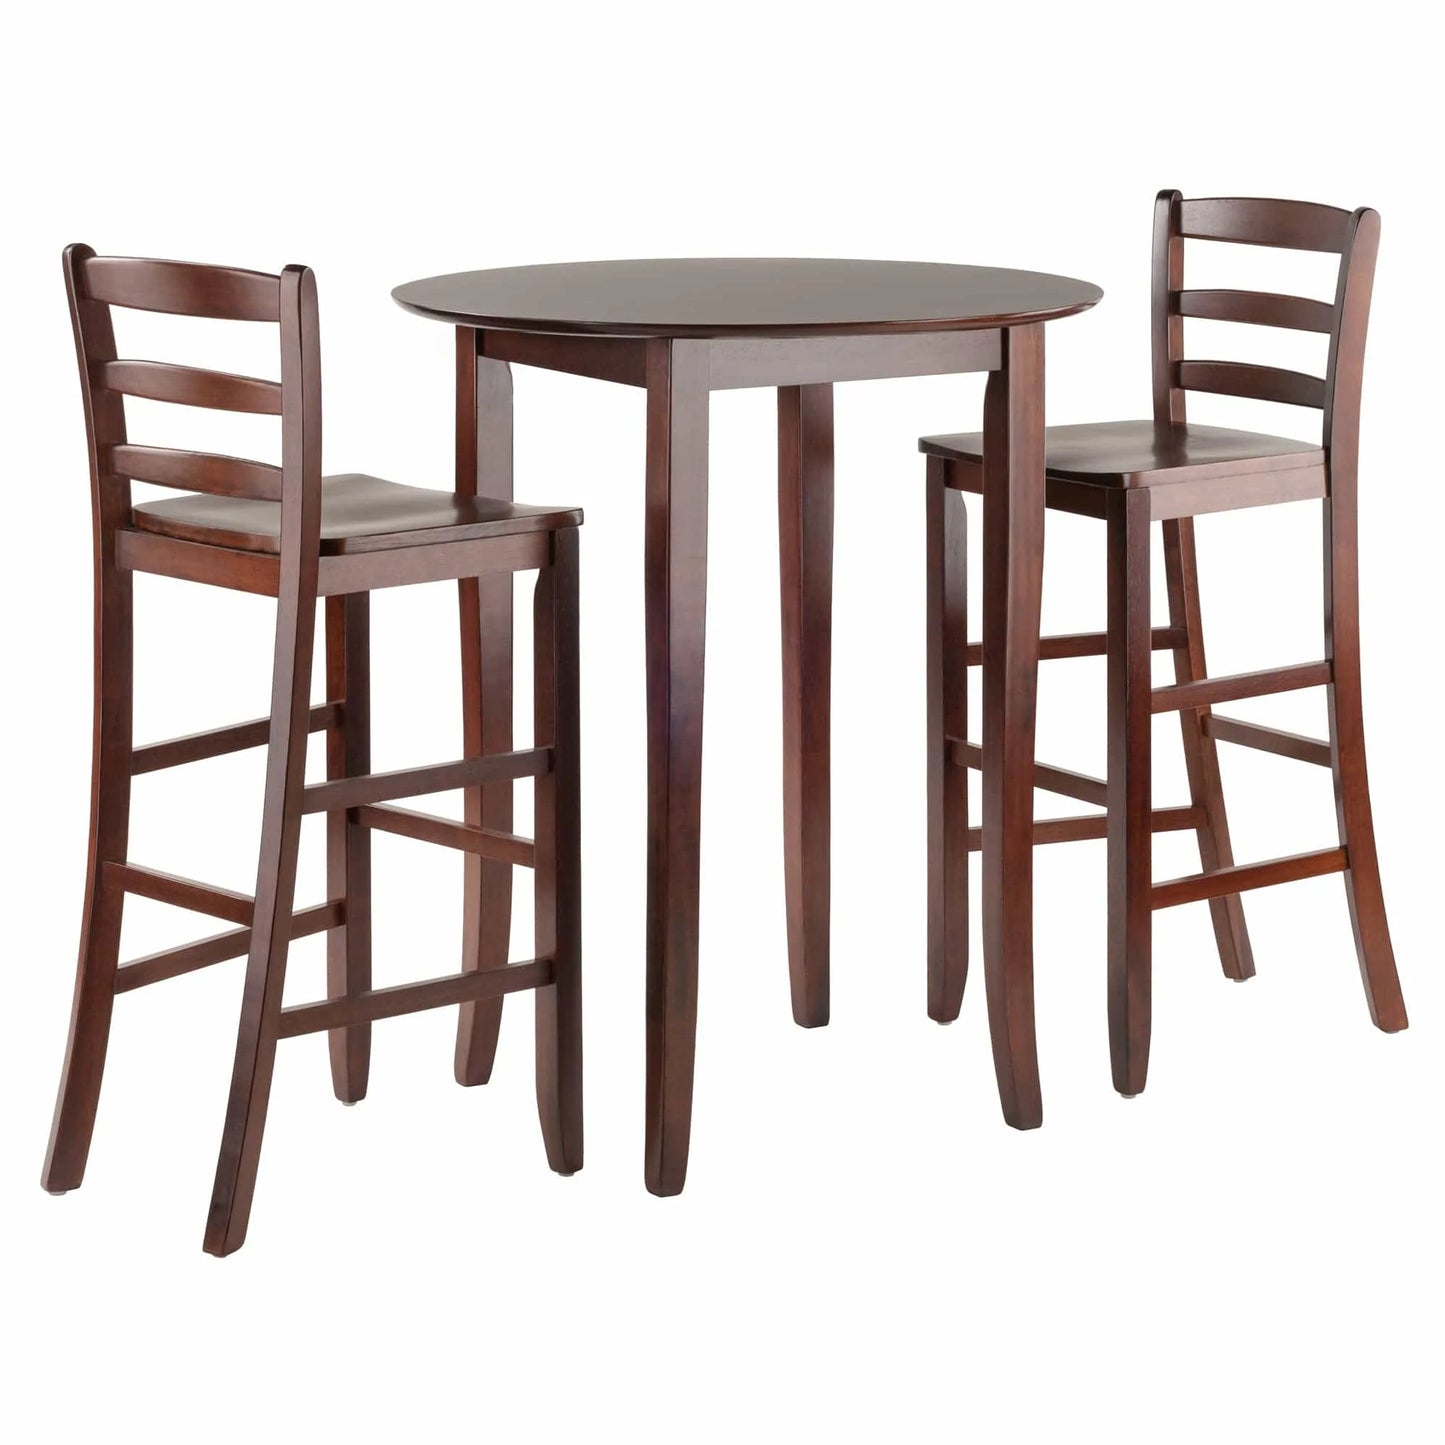 WINSOME Pub Table Set Fiona 3-Pc High Table with Ladder-back Bar Stools, Walnut